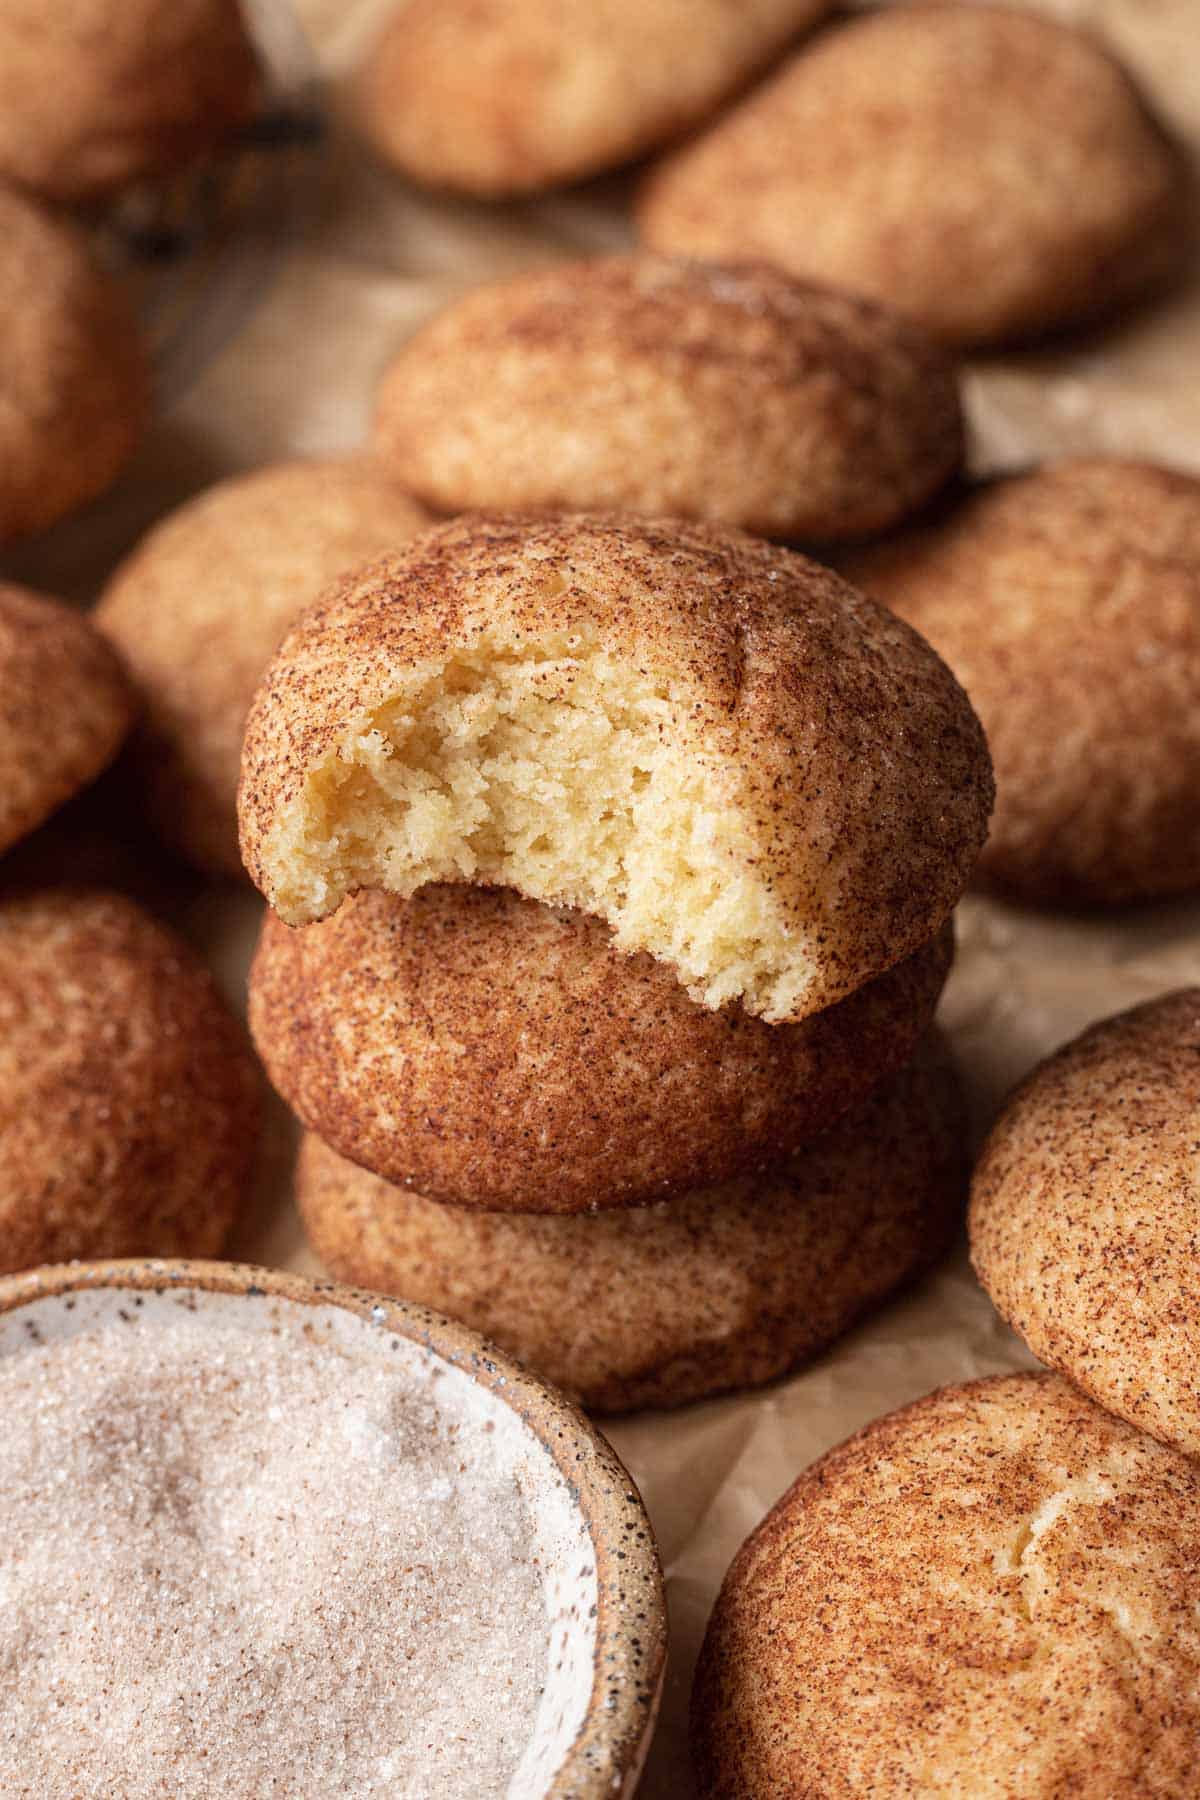 Snickerdoodle cookies on baking sheet, with three snickerdoodle cookies stacked on top of each other and the top cookie having a bite out of it.